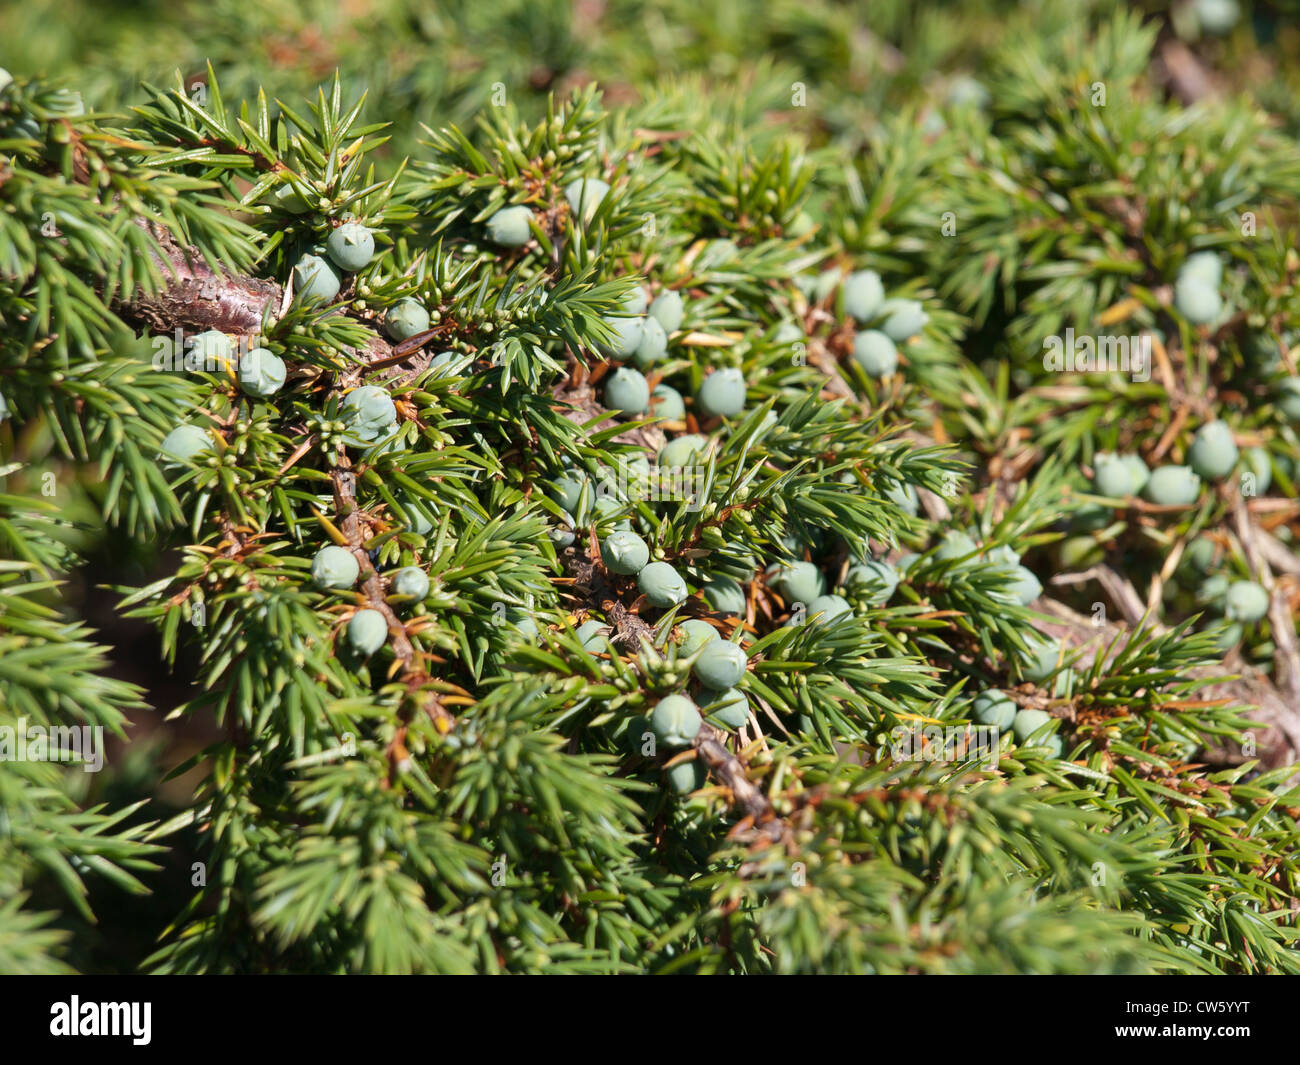 Branch from juniper bush with needles and unripe green berries Stock Photo